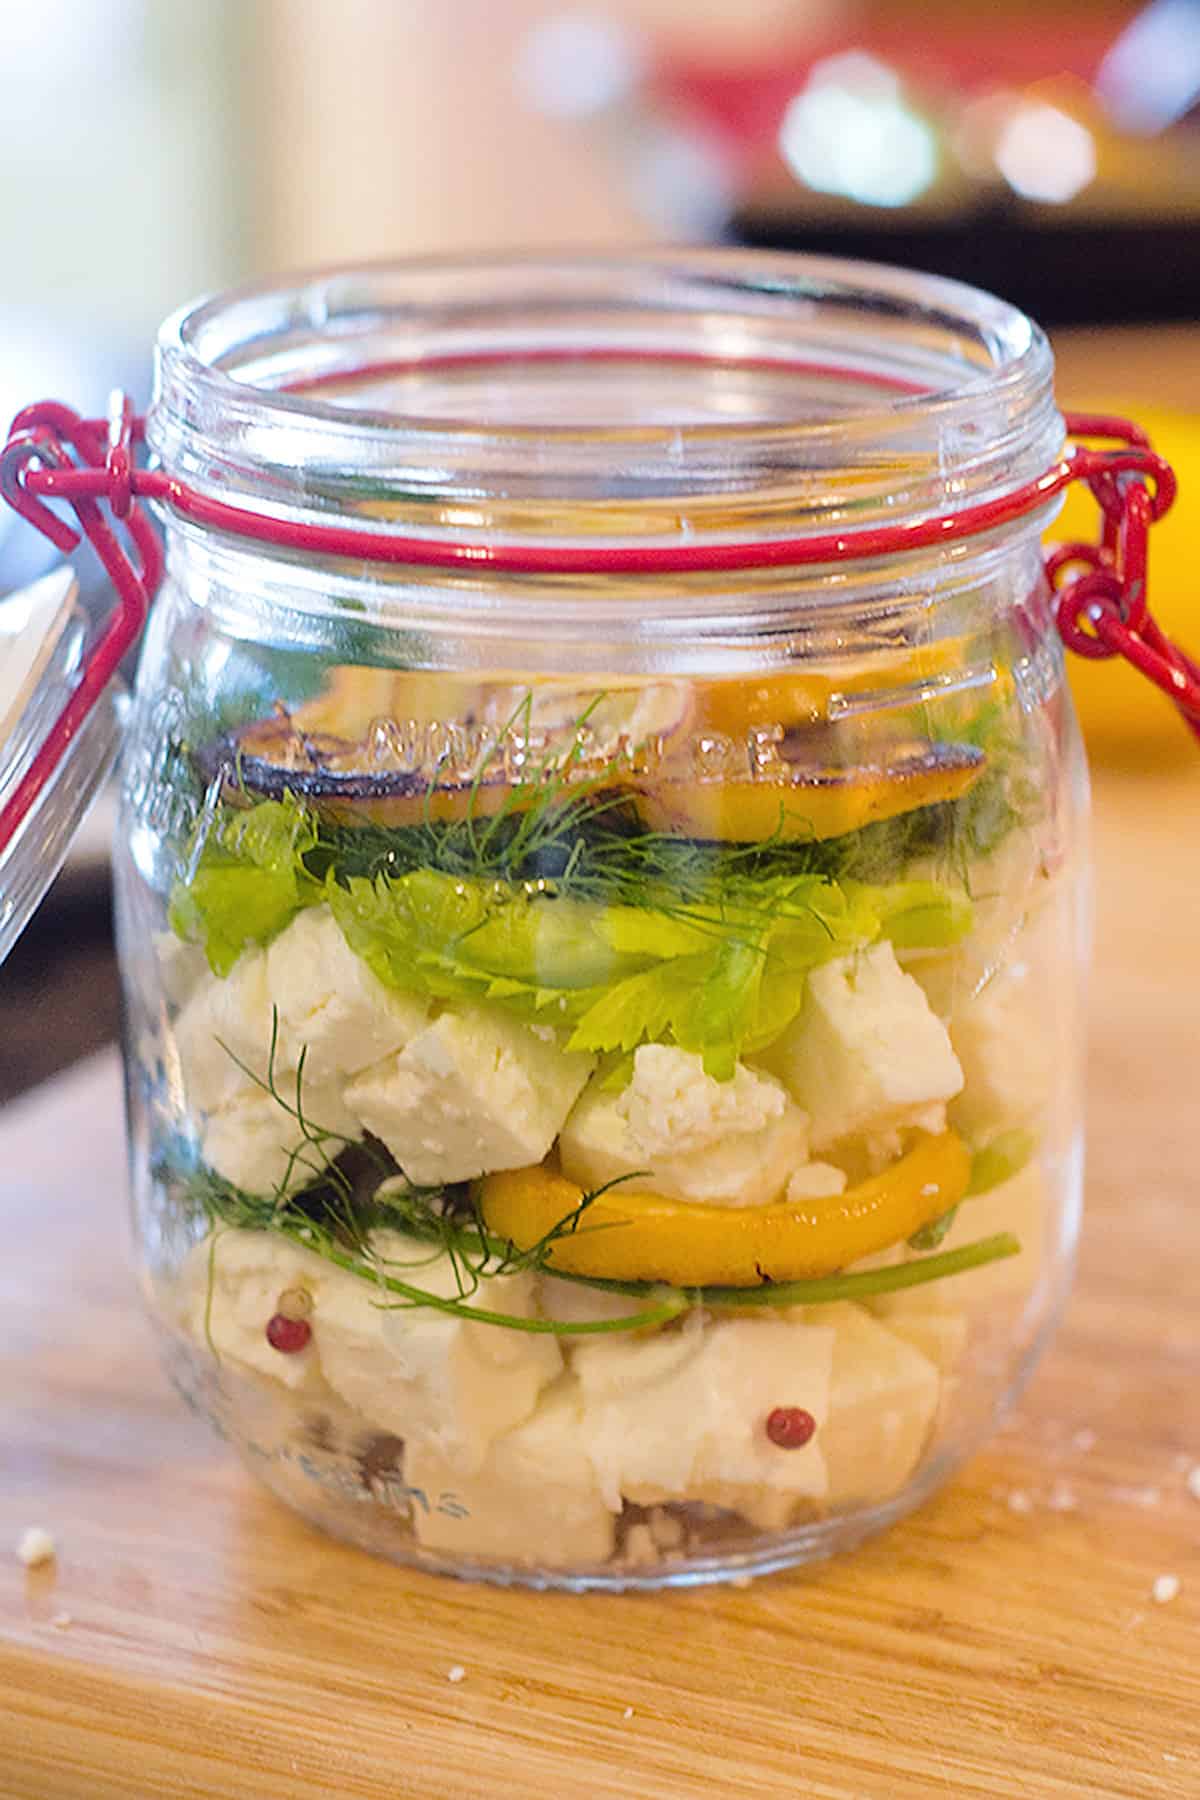 All ingredients layered in a jar.